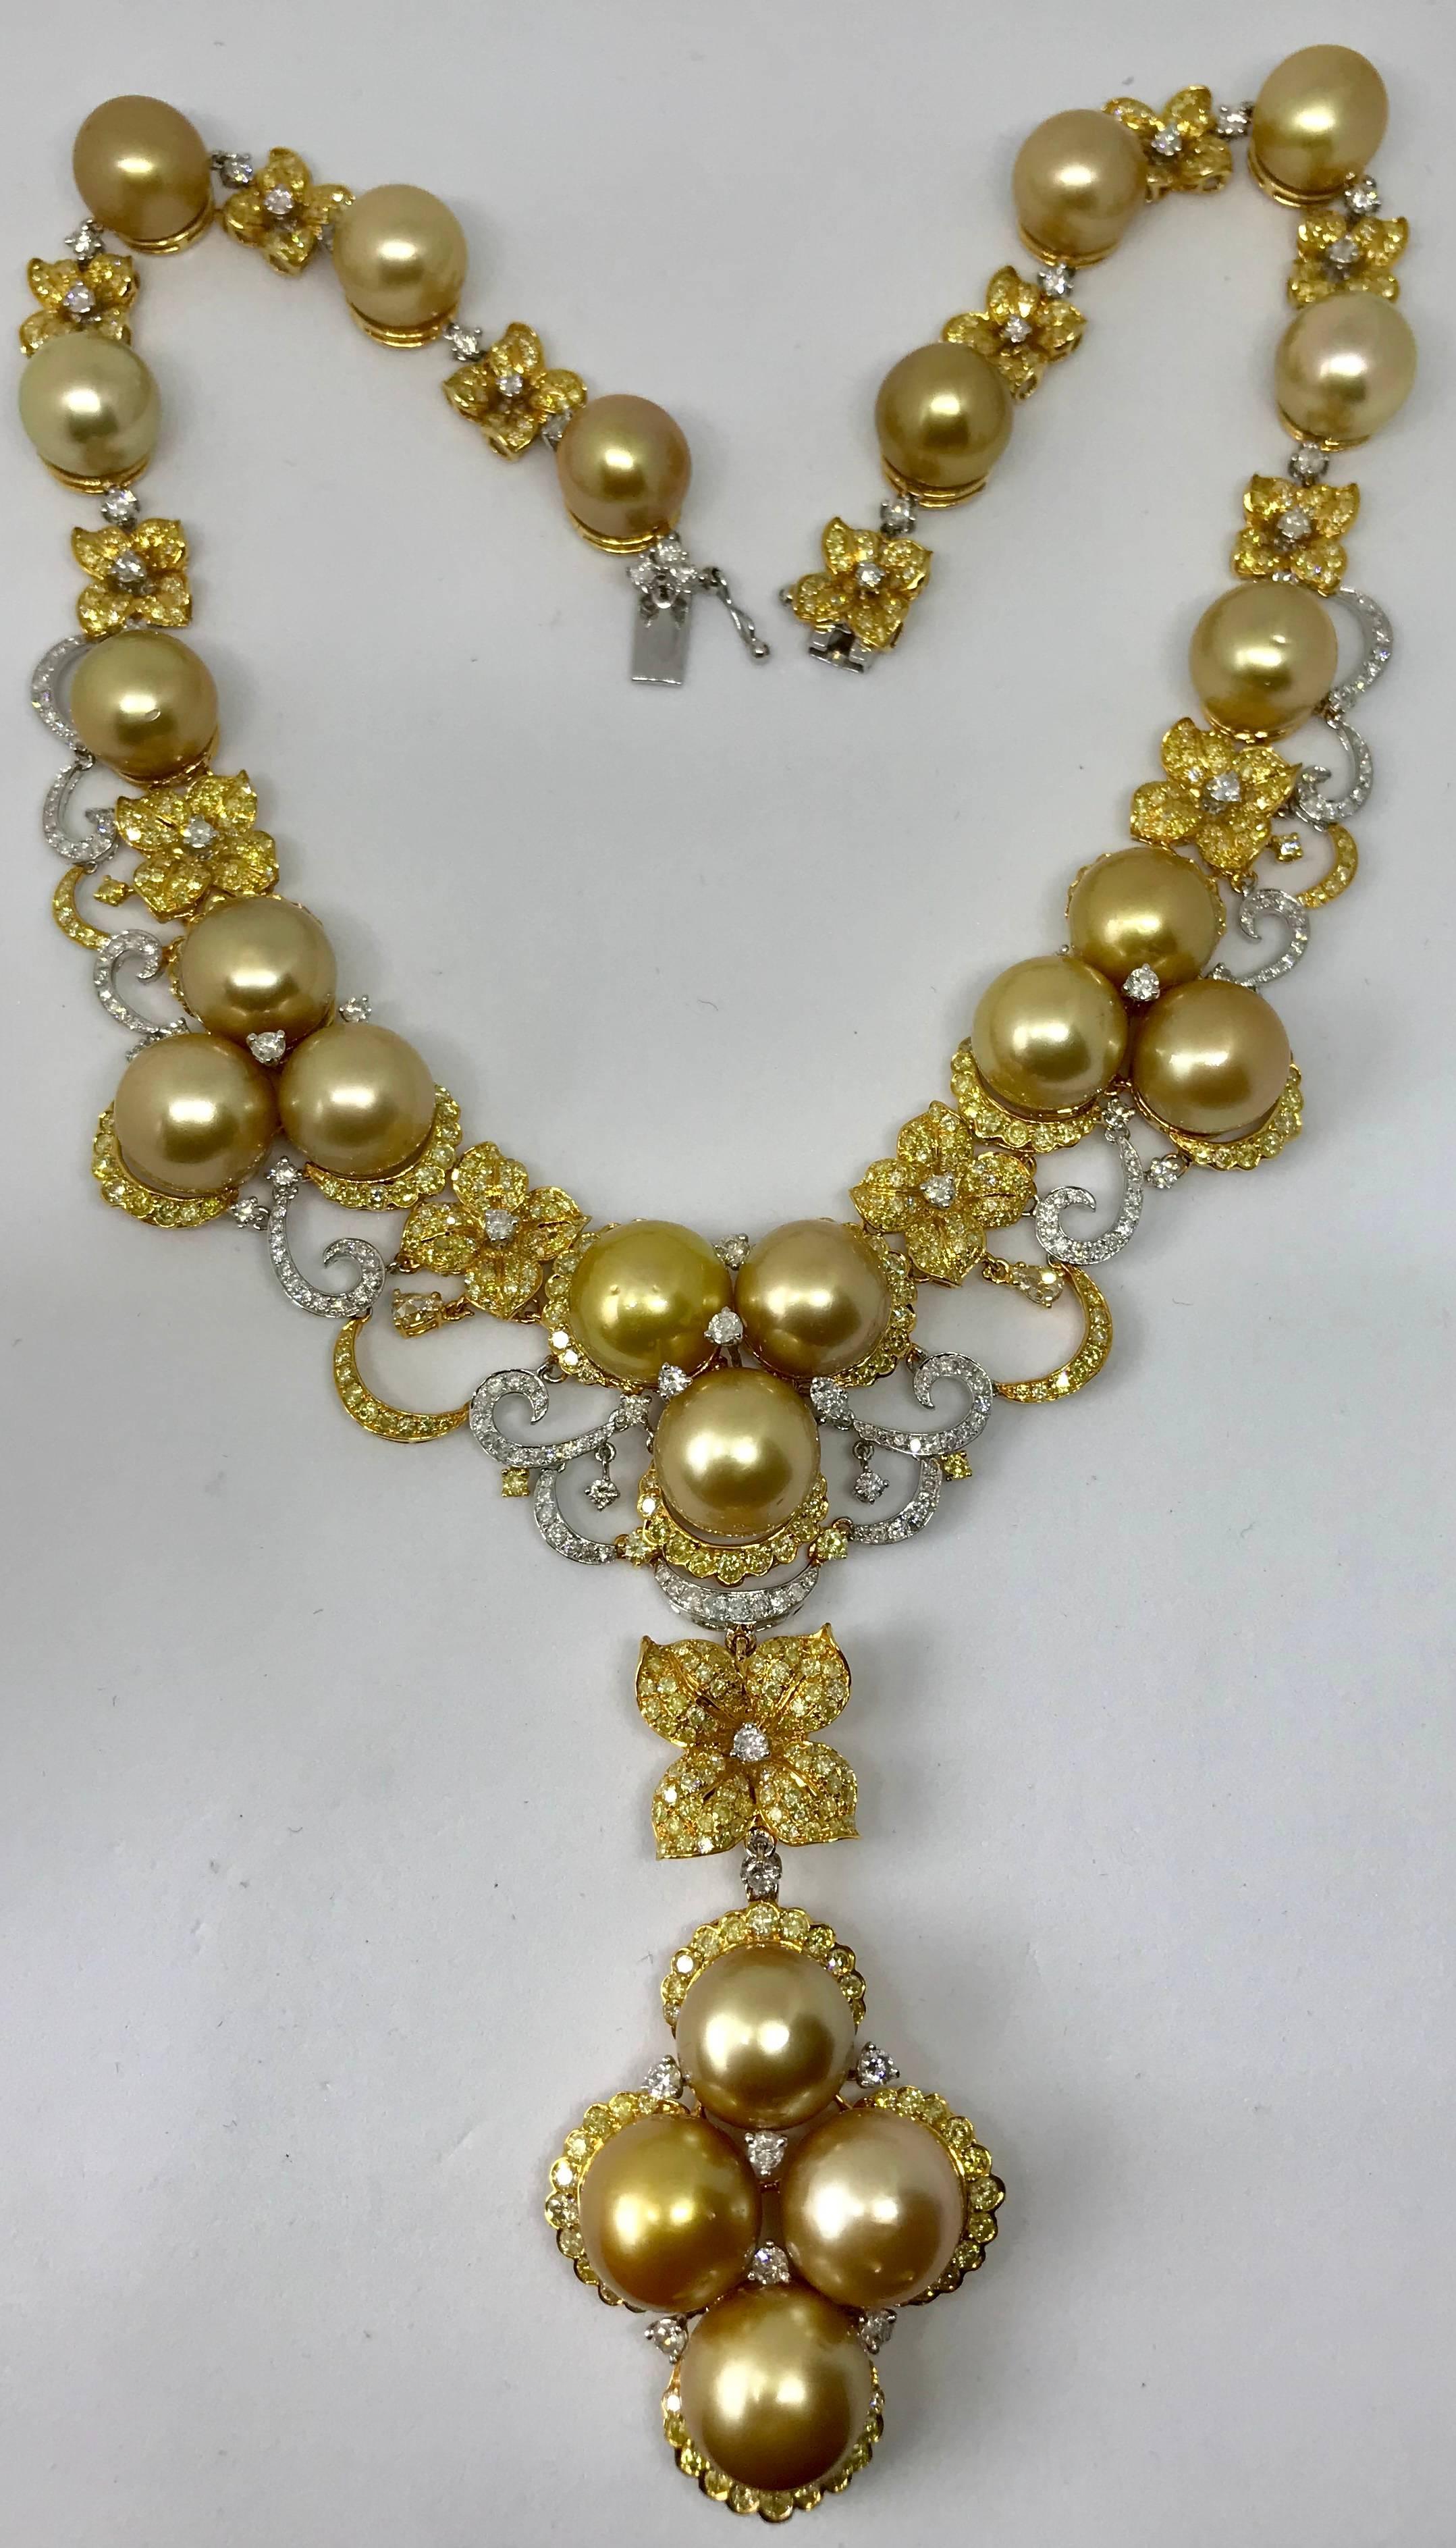 Golden South Sea Pearl Necklace with Diamonds and 18kt Gold 64.26 grams im Angebot 1